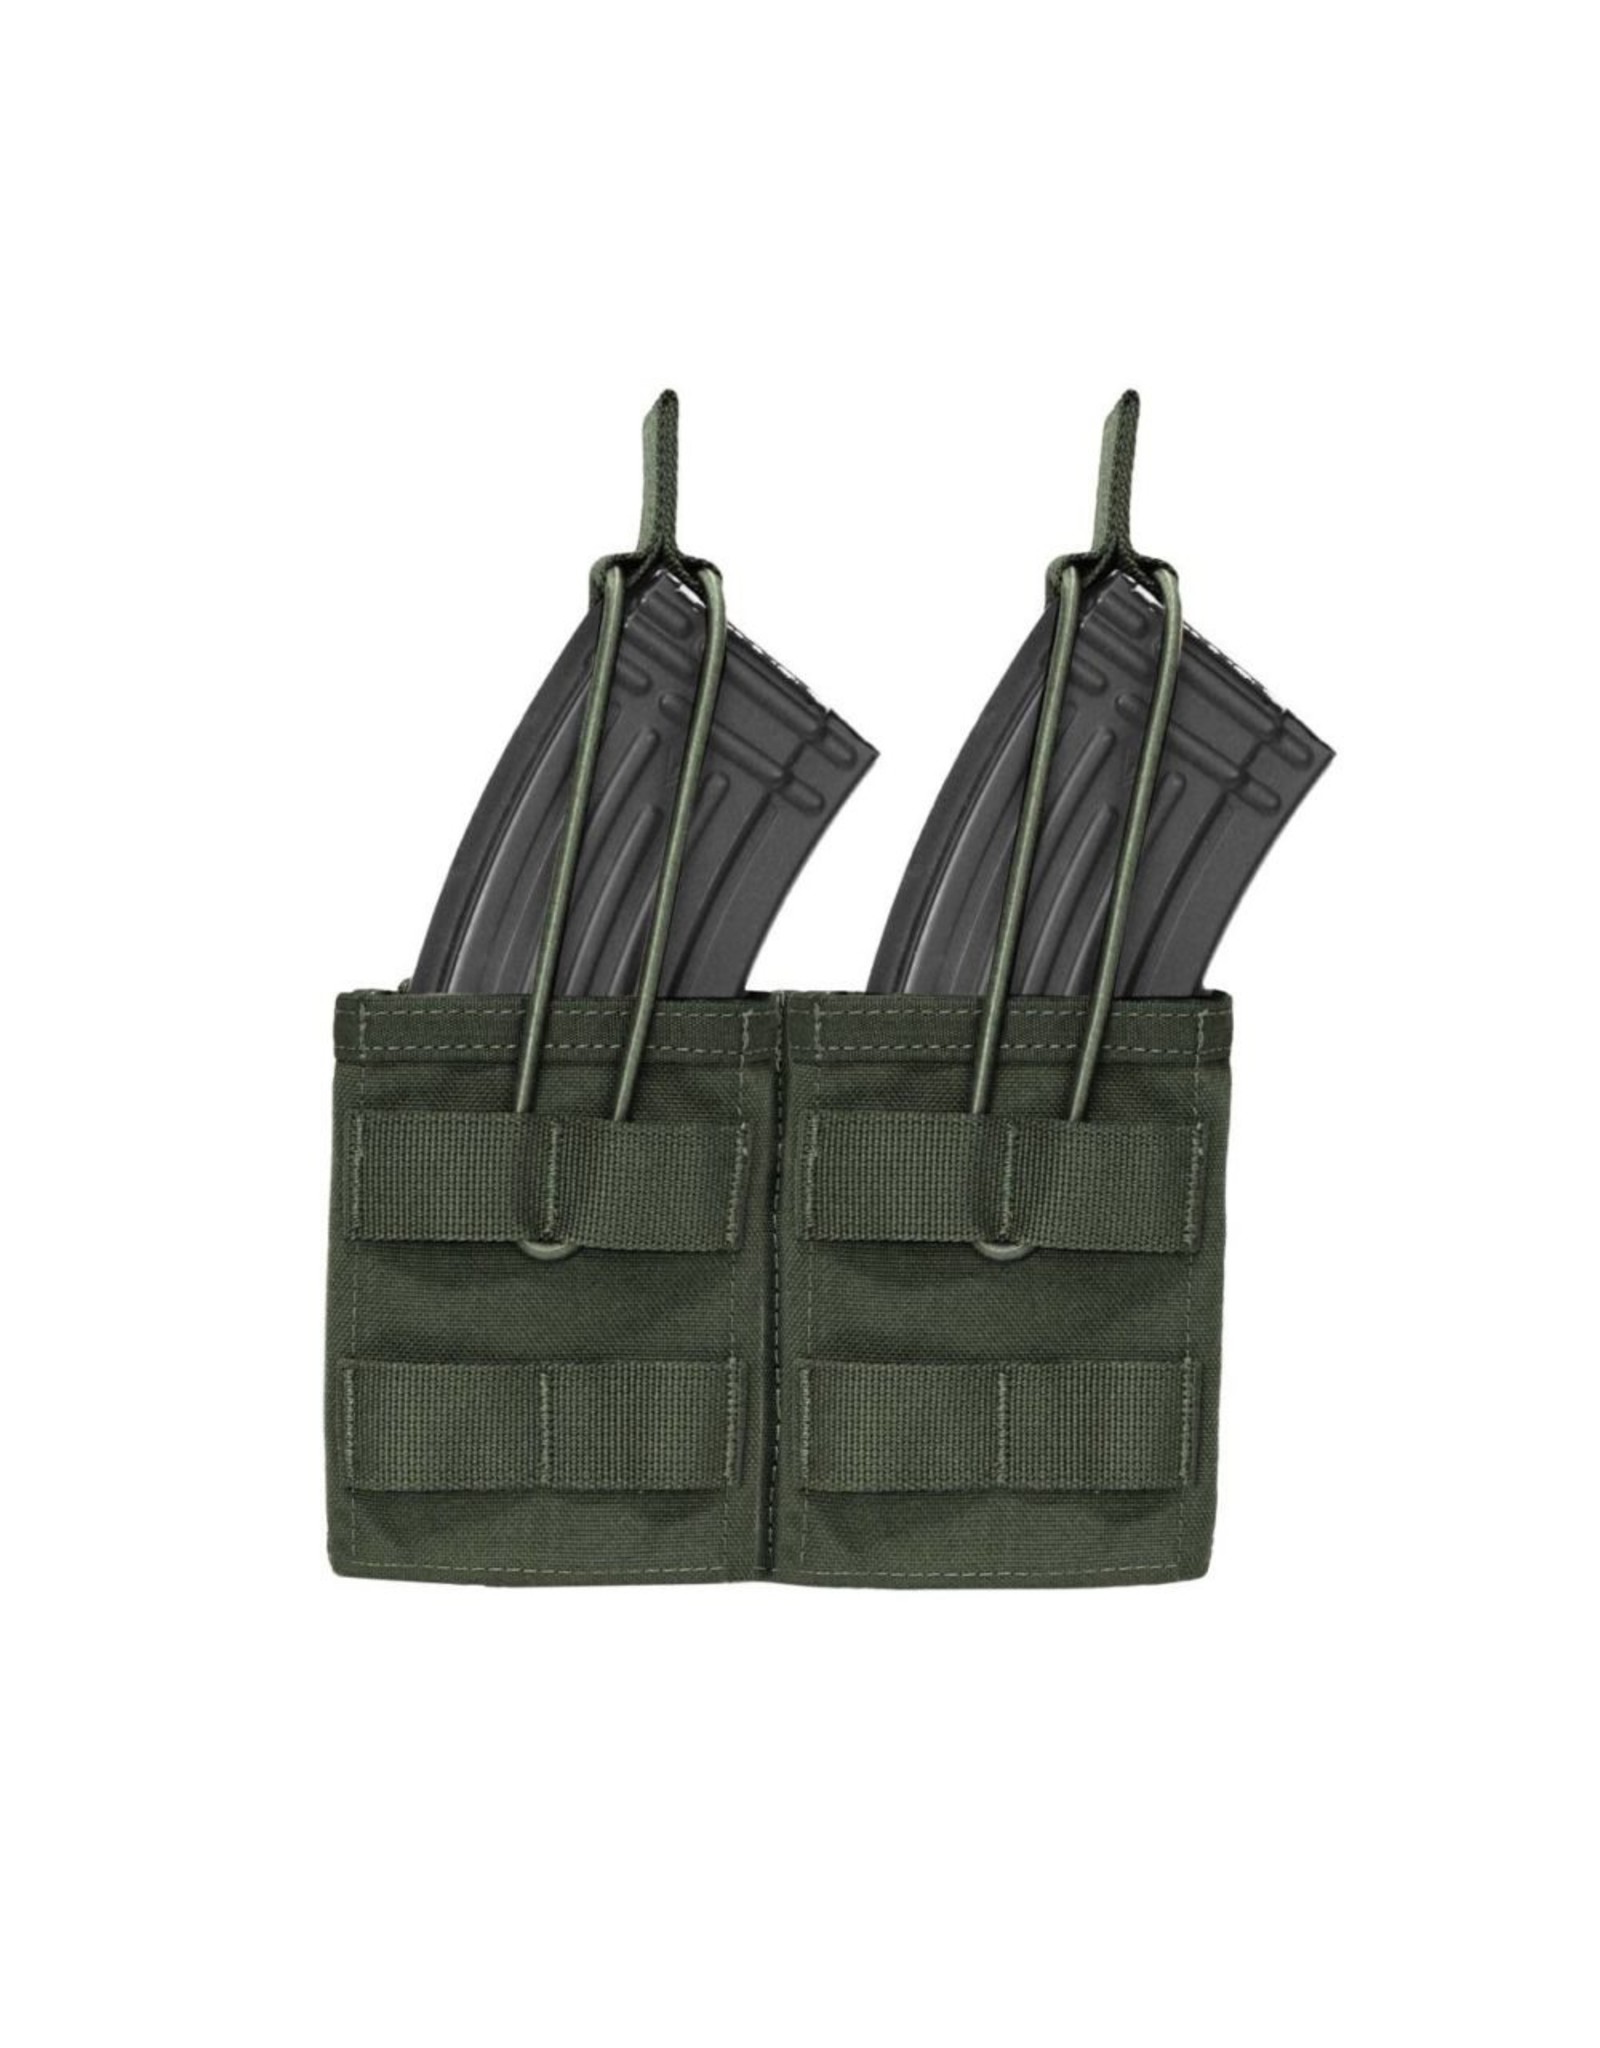 Warrior Double Molle Open AK7.62mm - Olive Drab